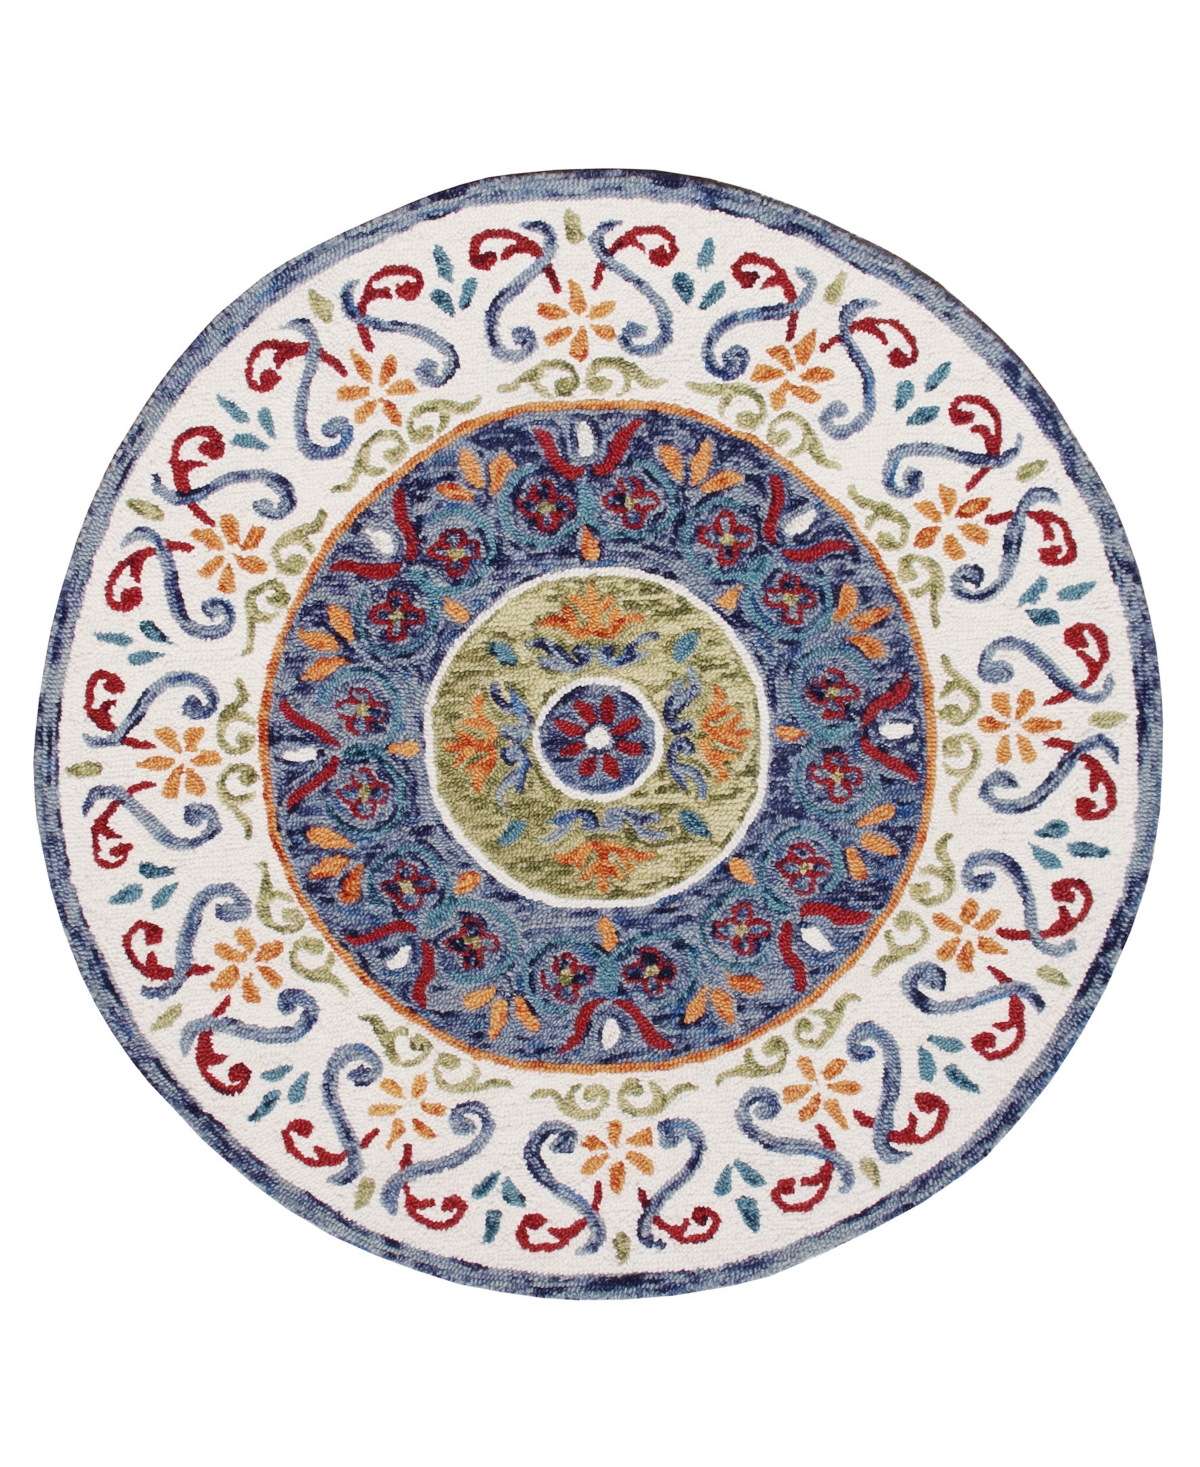 Lr Home Sweet Sinuo54155 4' X 4' Round Area Rug In White